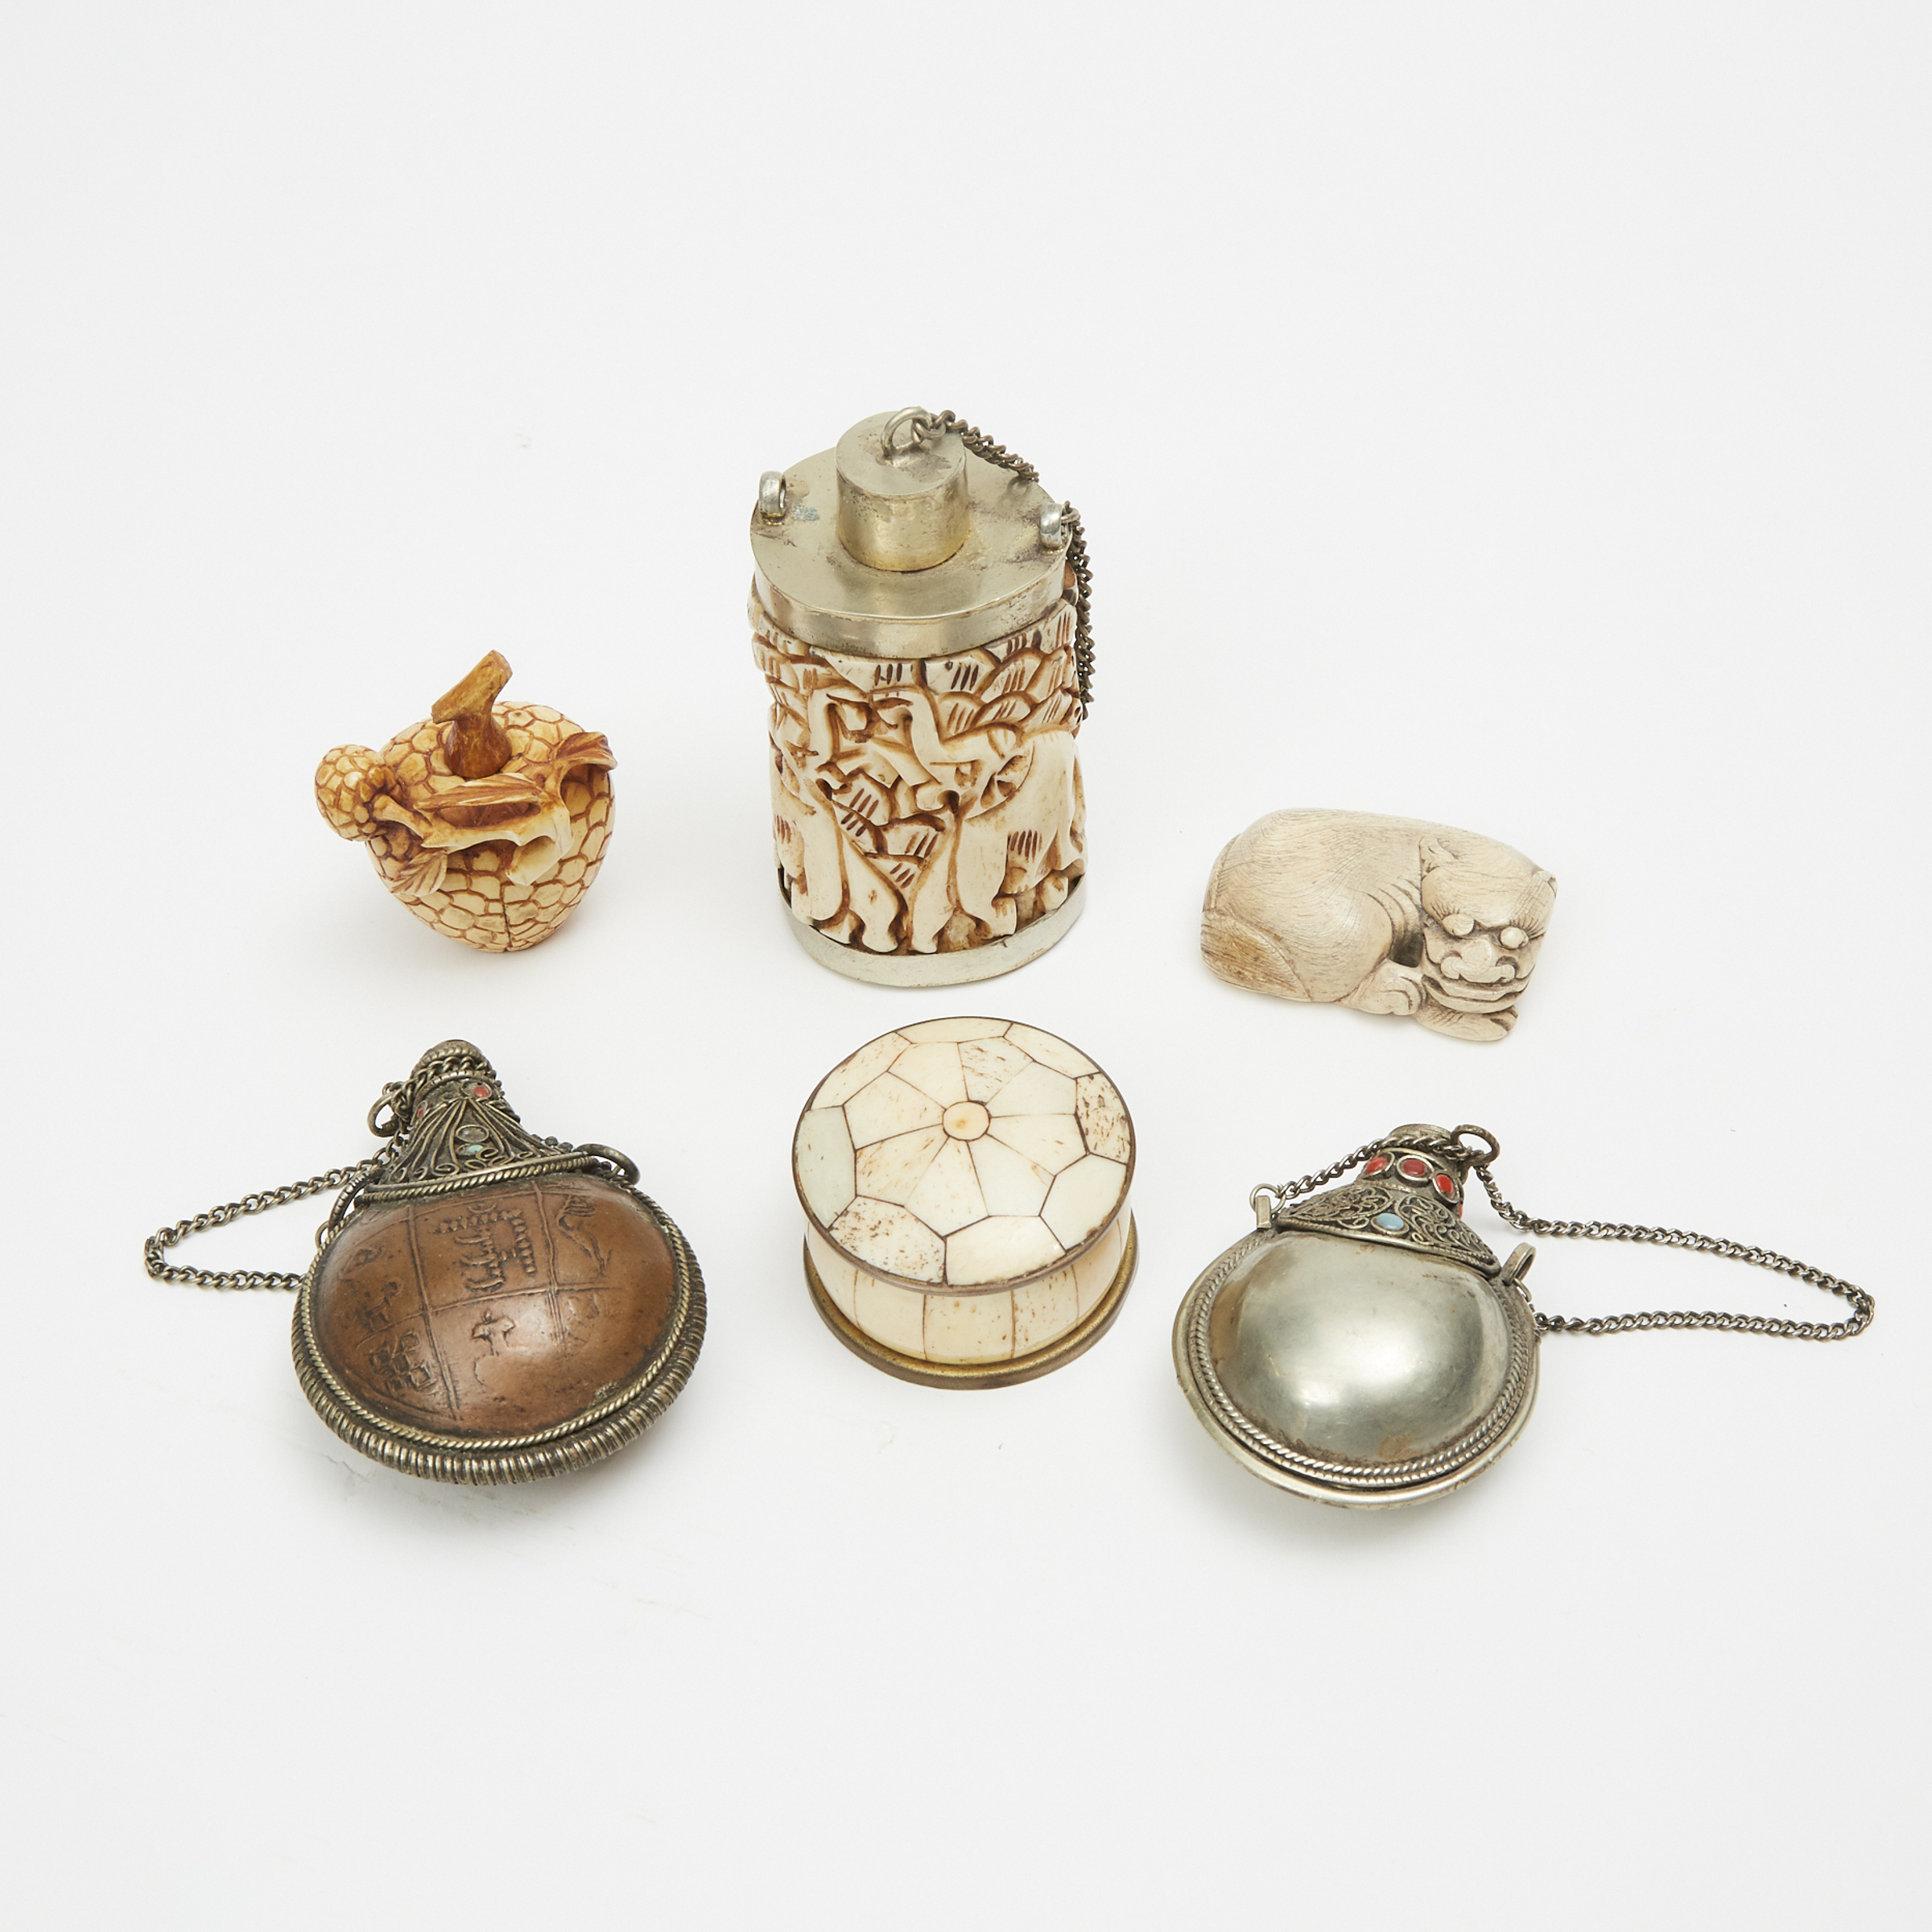 A Group of Six Miscellaneous Ivory and Metal Objects, 19th/Early 20th Century